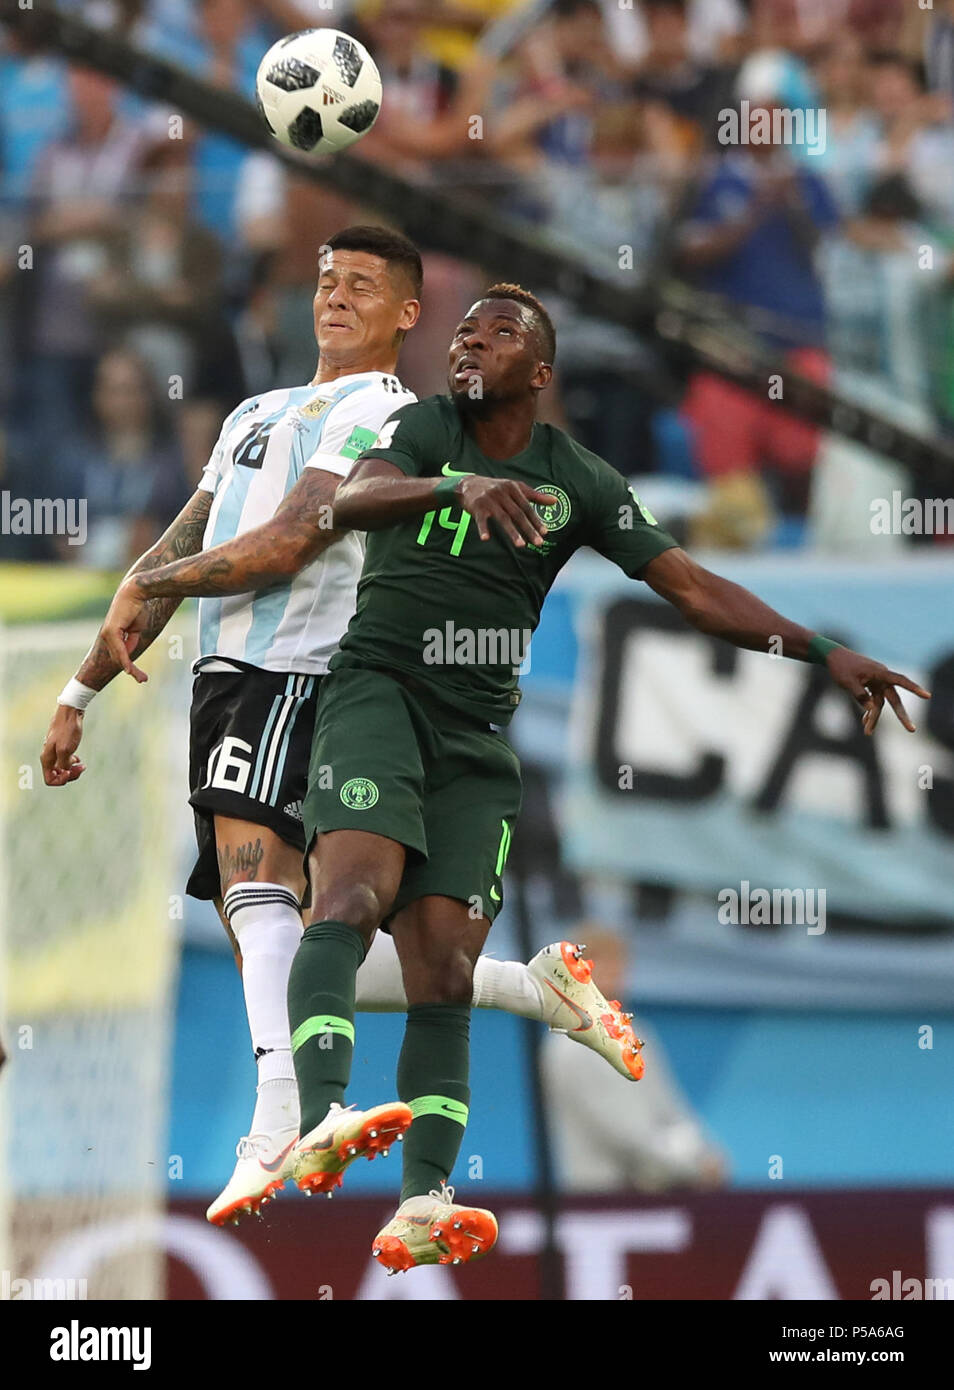 Saint Petersburg, Russia. 26th June, 2018. Kelechi Iheanacho (R) of Nigeria competes for a header with Marcos Rojo of Argentina during the 2018 FIFA World Cup Group D match between Nigeria and Argentina in Saint Petersburg, Russia, June 26, 2018. Credit: Wu Zhuang/Xinhua/Alamy Live News Stock Photo